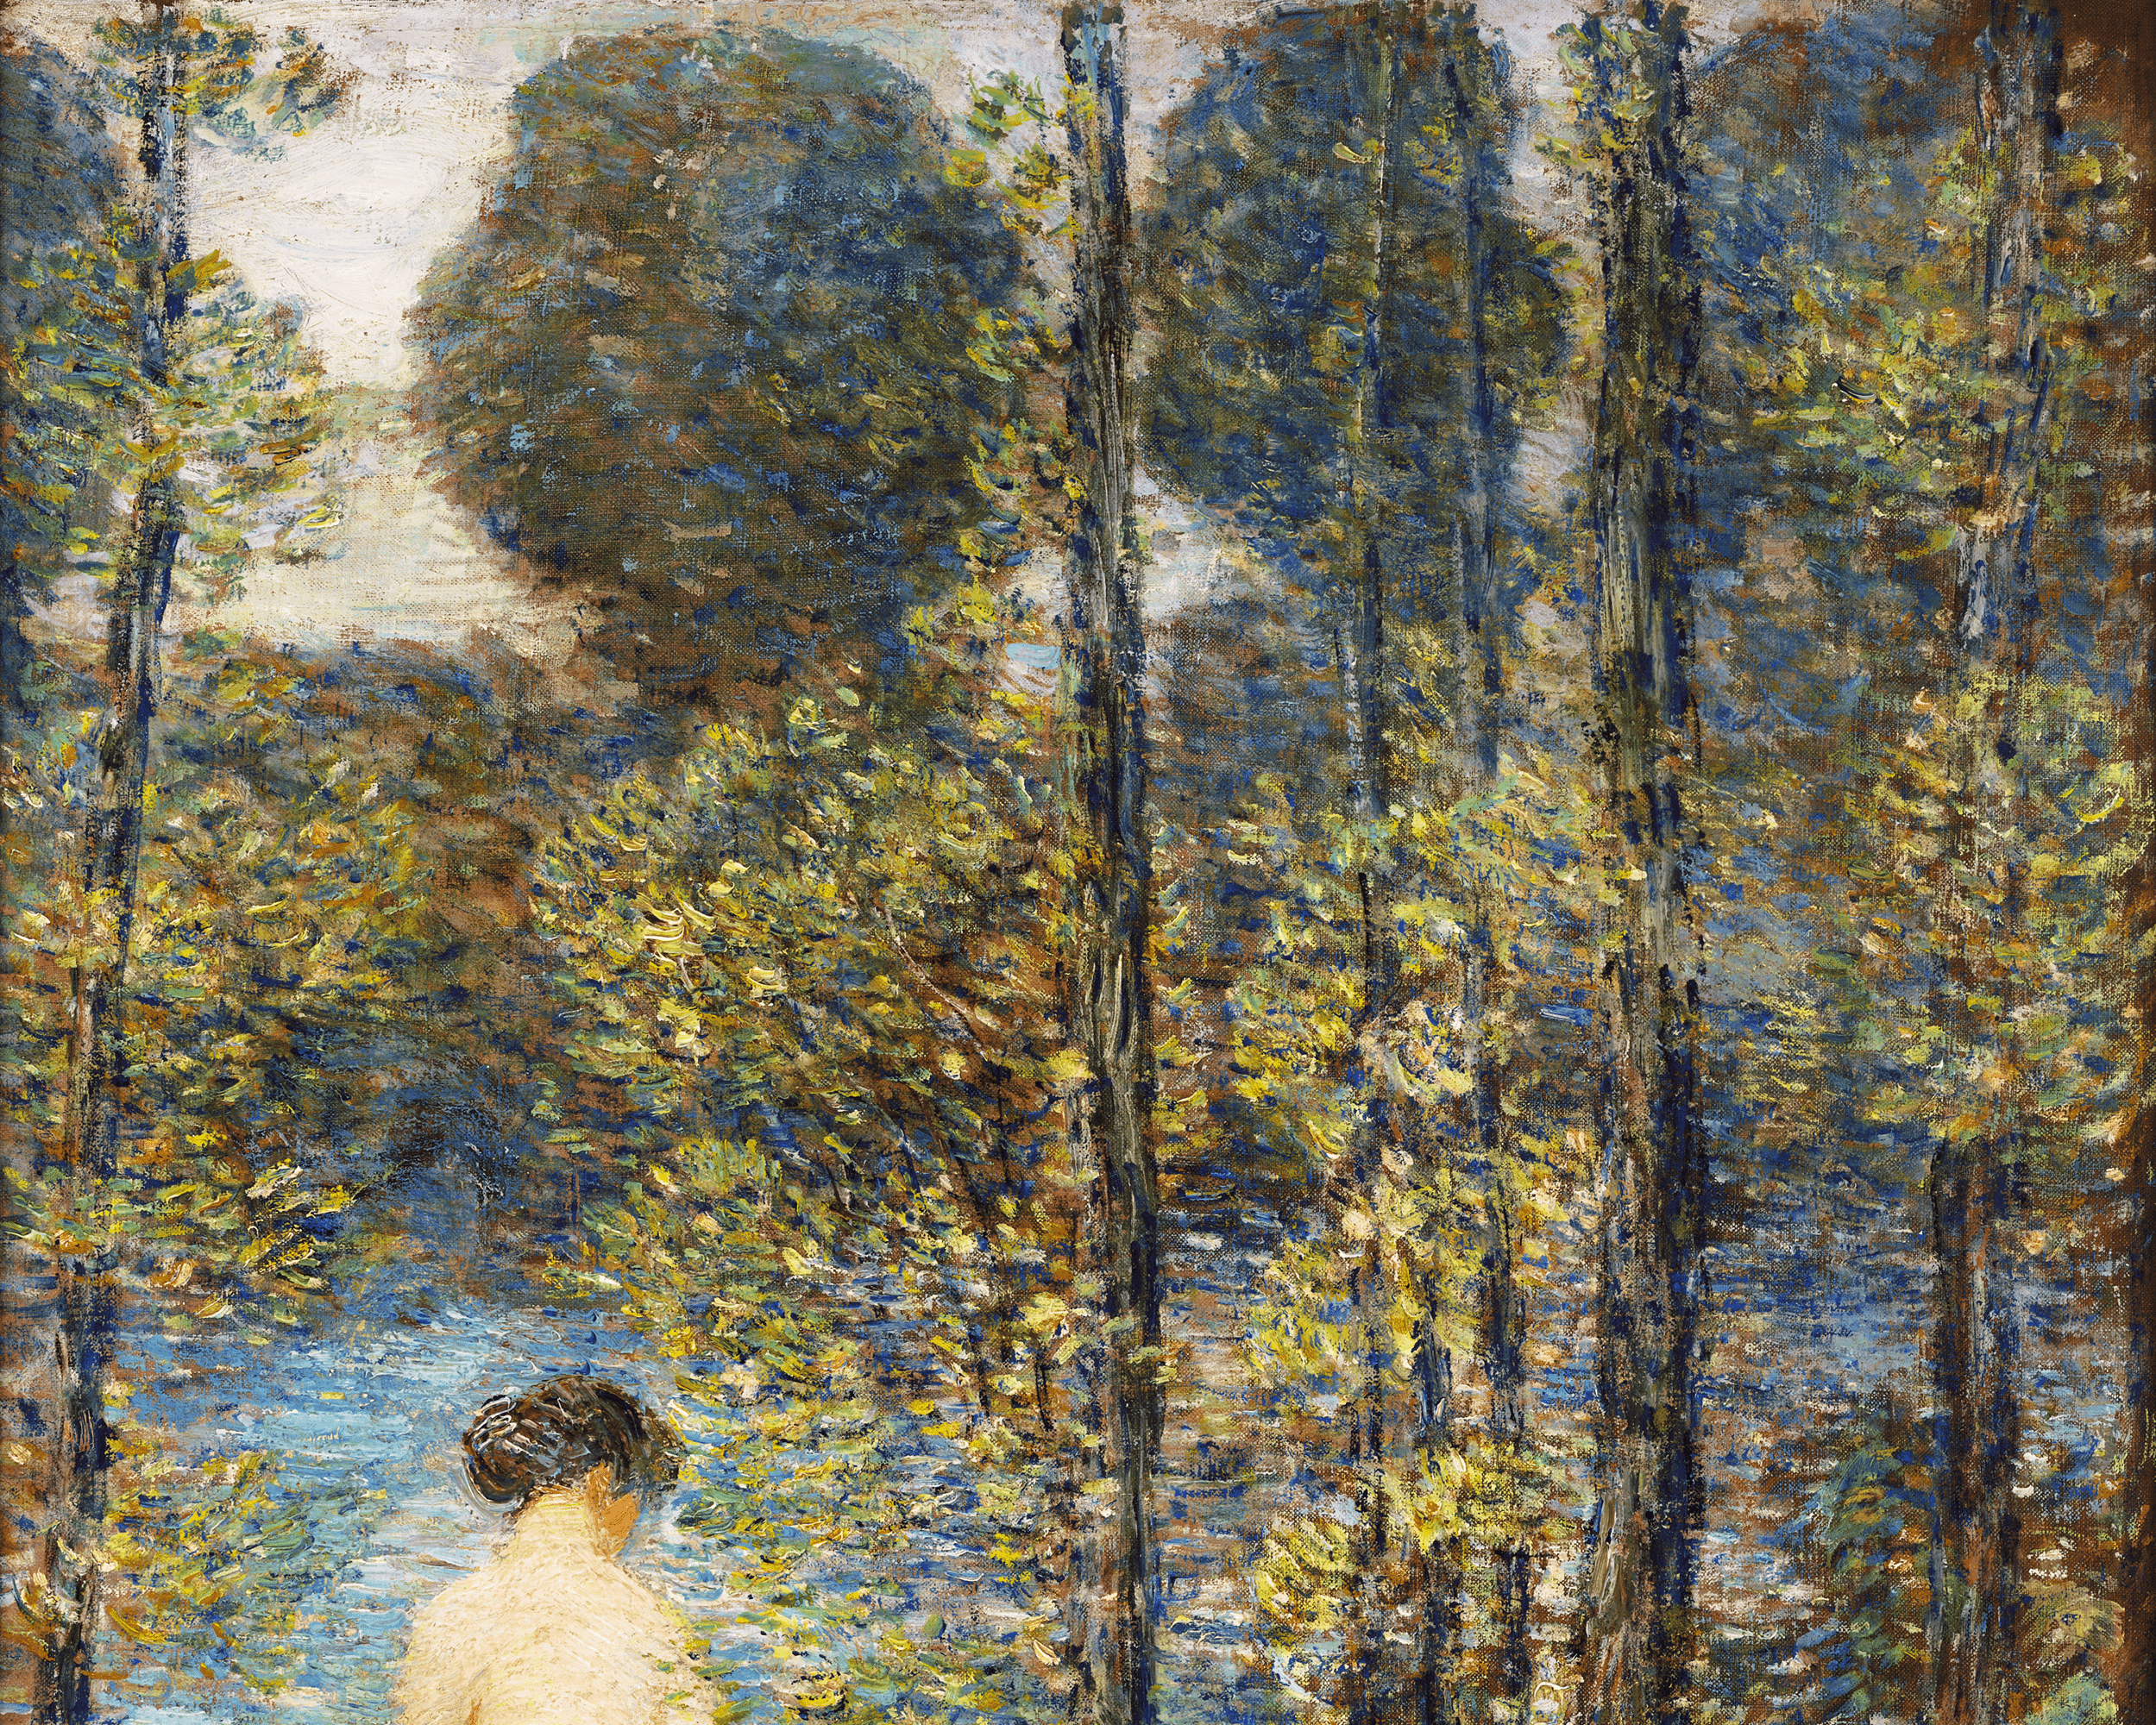 The Bather by Childe Hassam